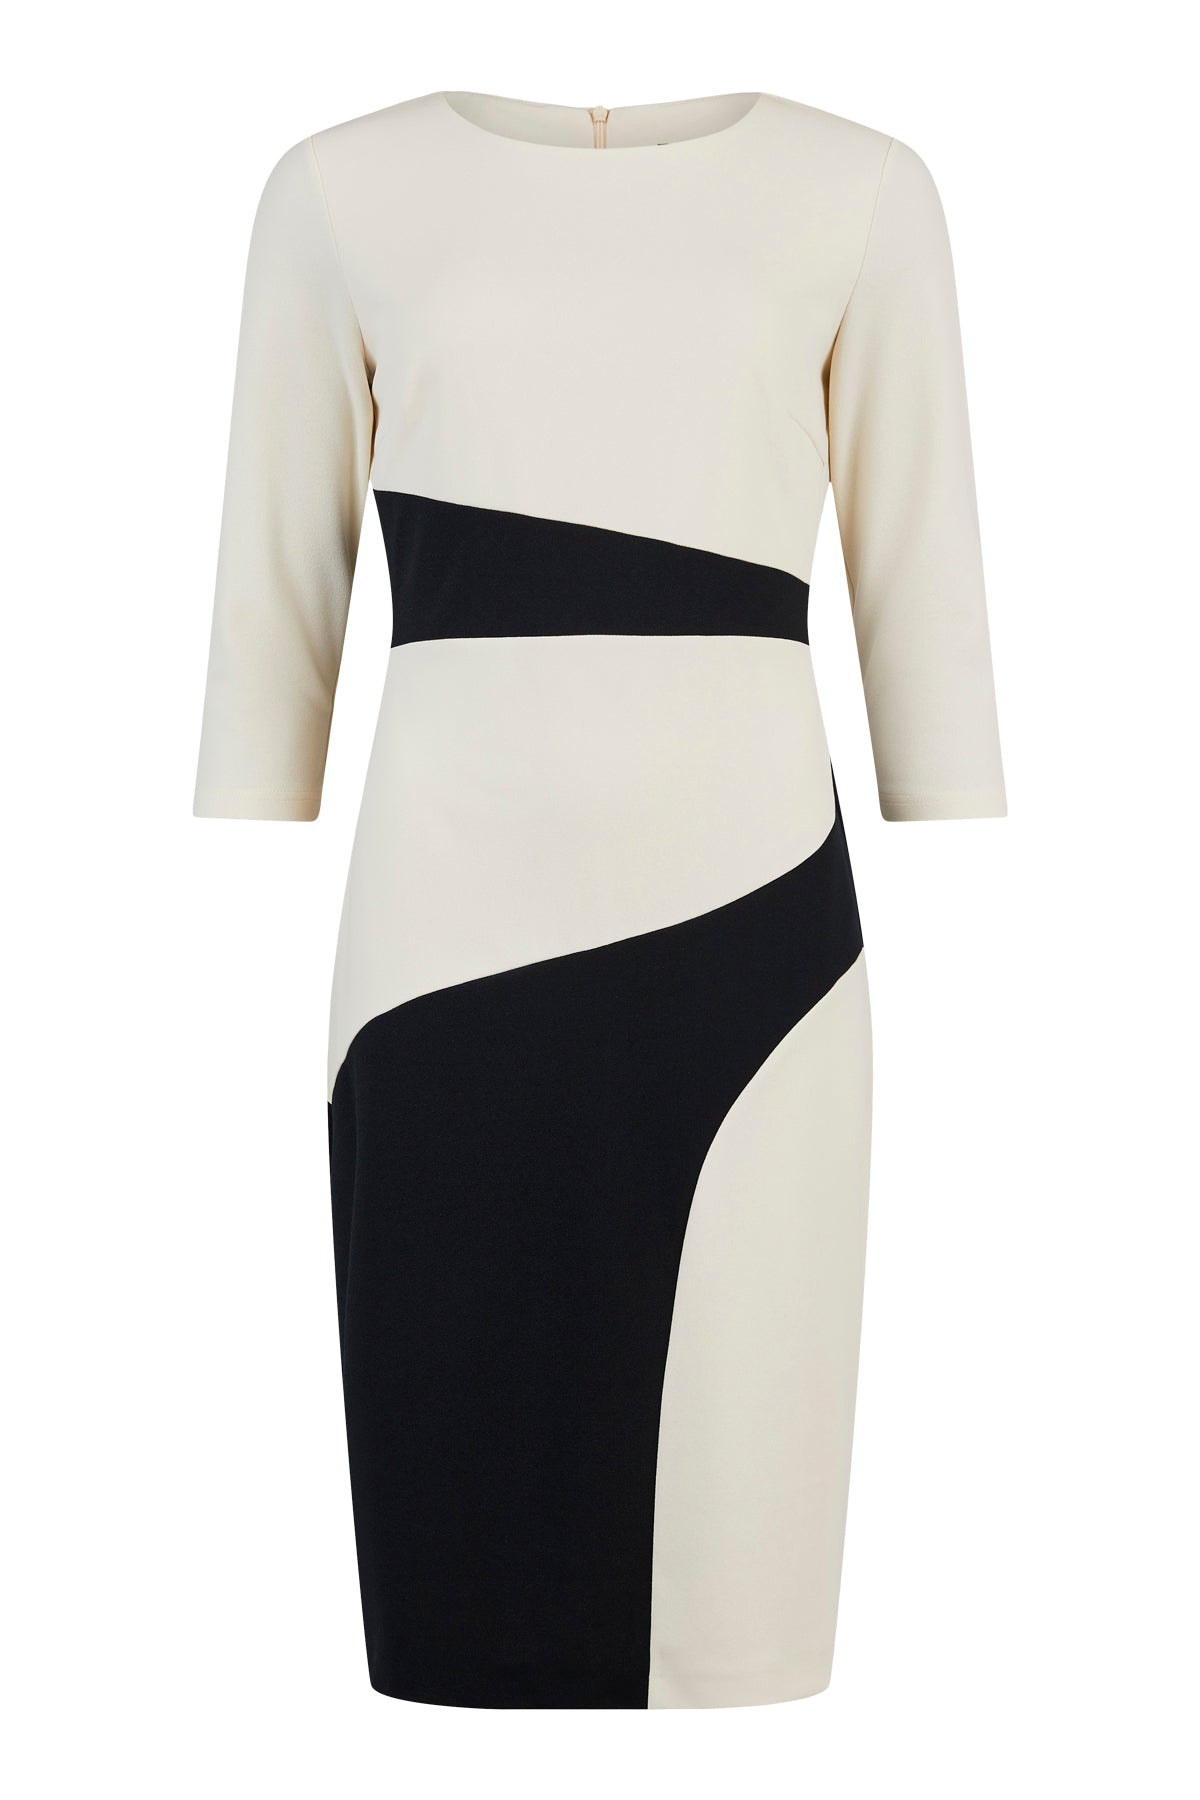 Tia body con dress in winter white and navy 78684